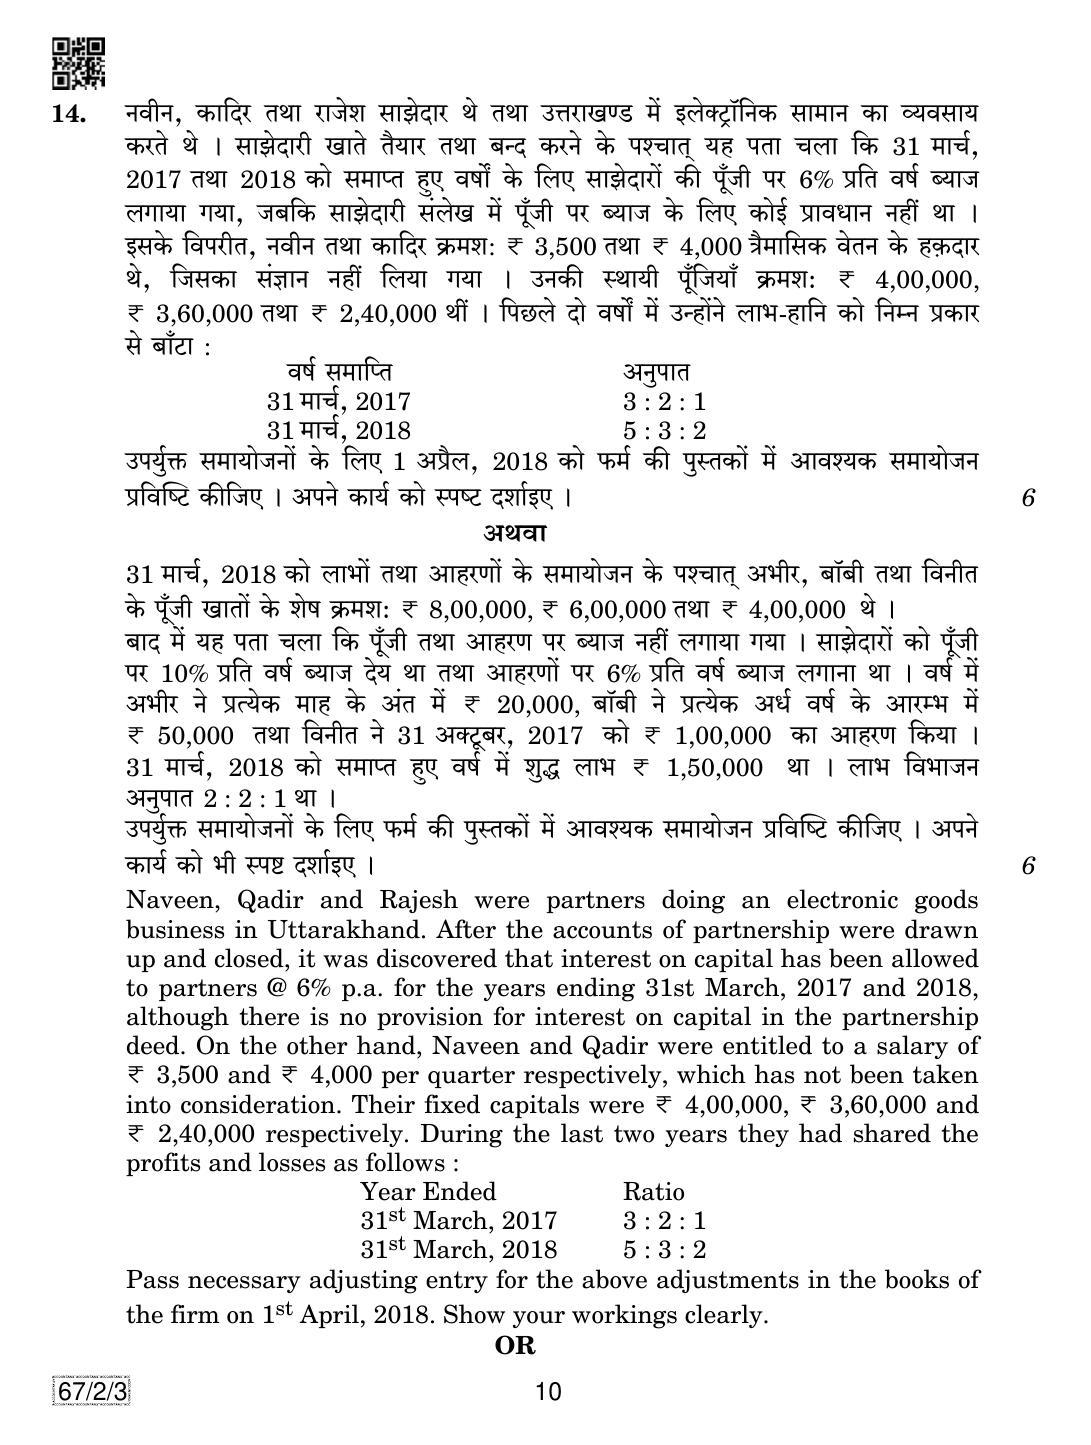 CBSE Class 12 67-2-3 Accountancy 2019 Question Paper - Page 10